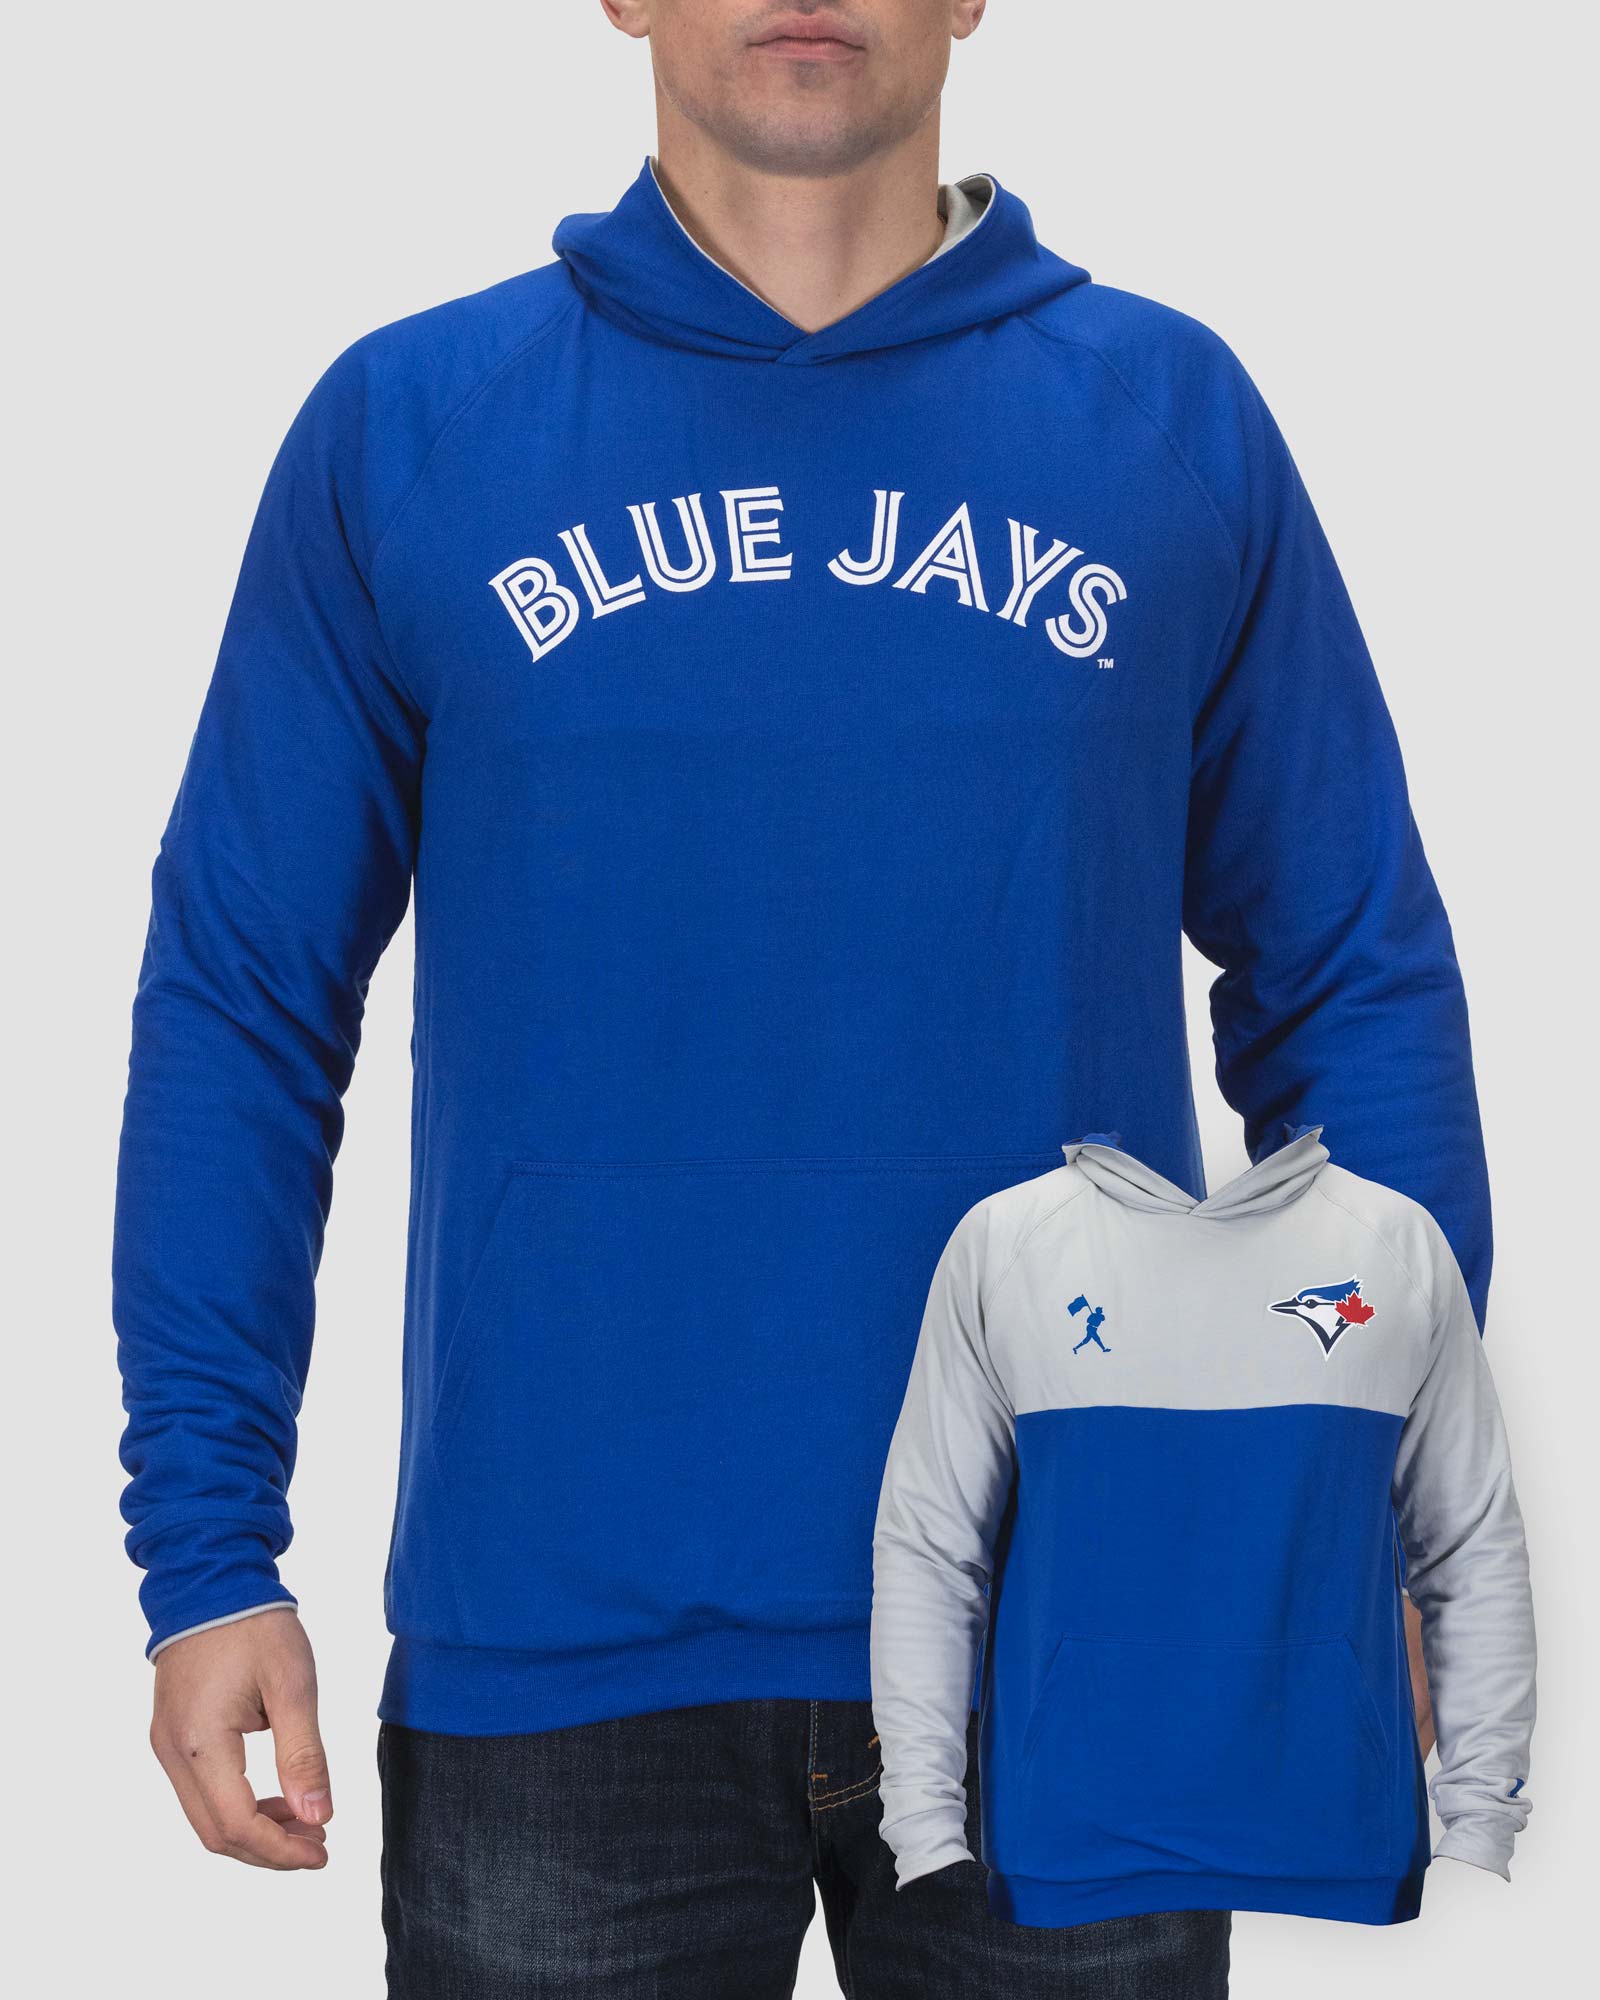 Toronto Blue Jays let's play ball shirt, hoodie, sweater and v